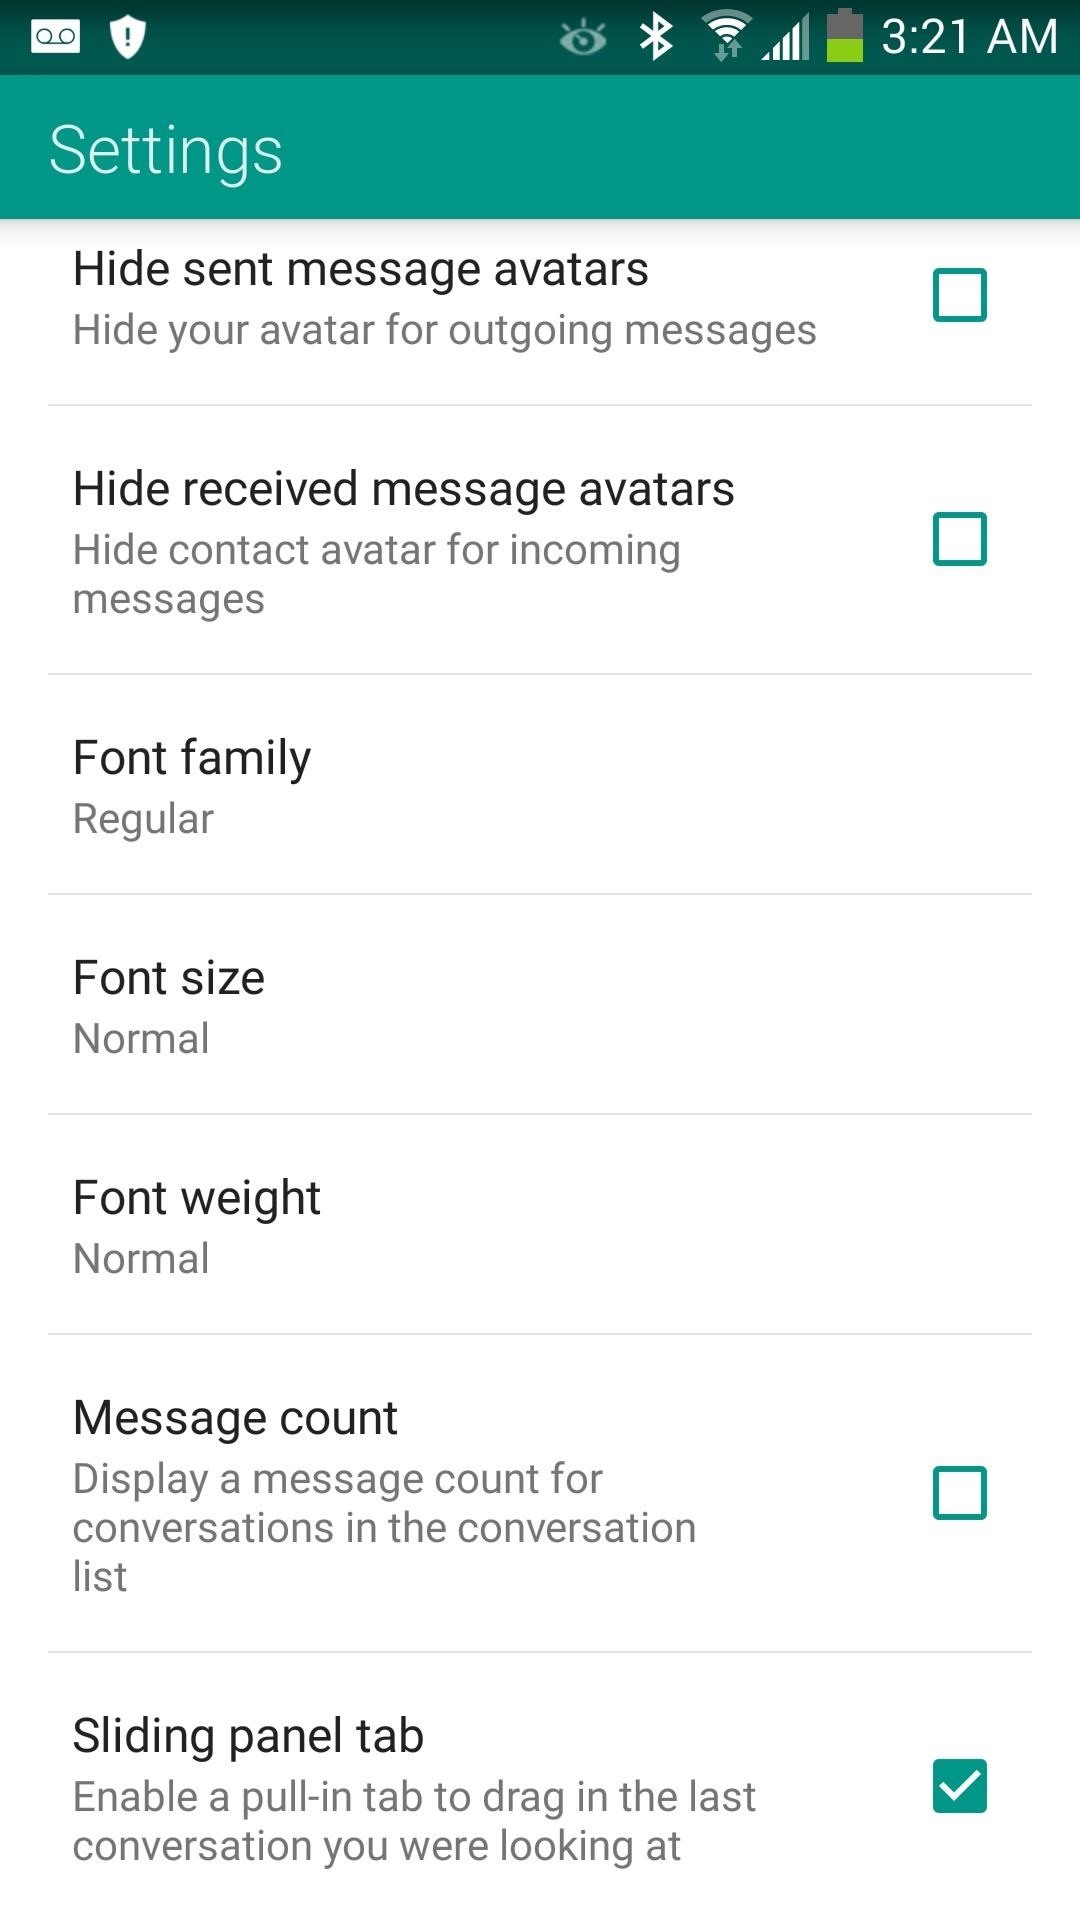 Get a Taste of Android L's Material Design with QKSMS Messaging